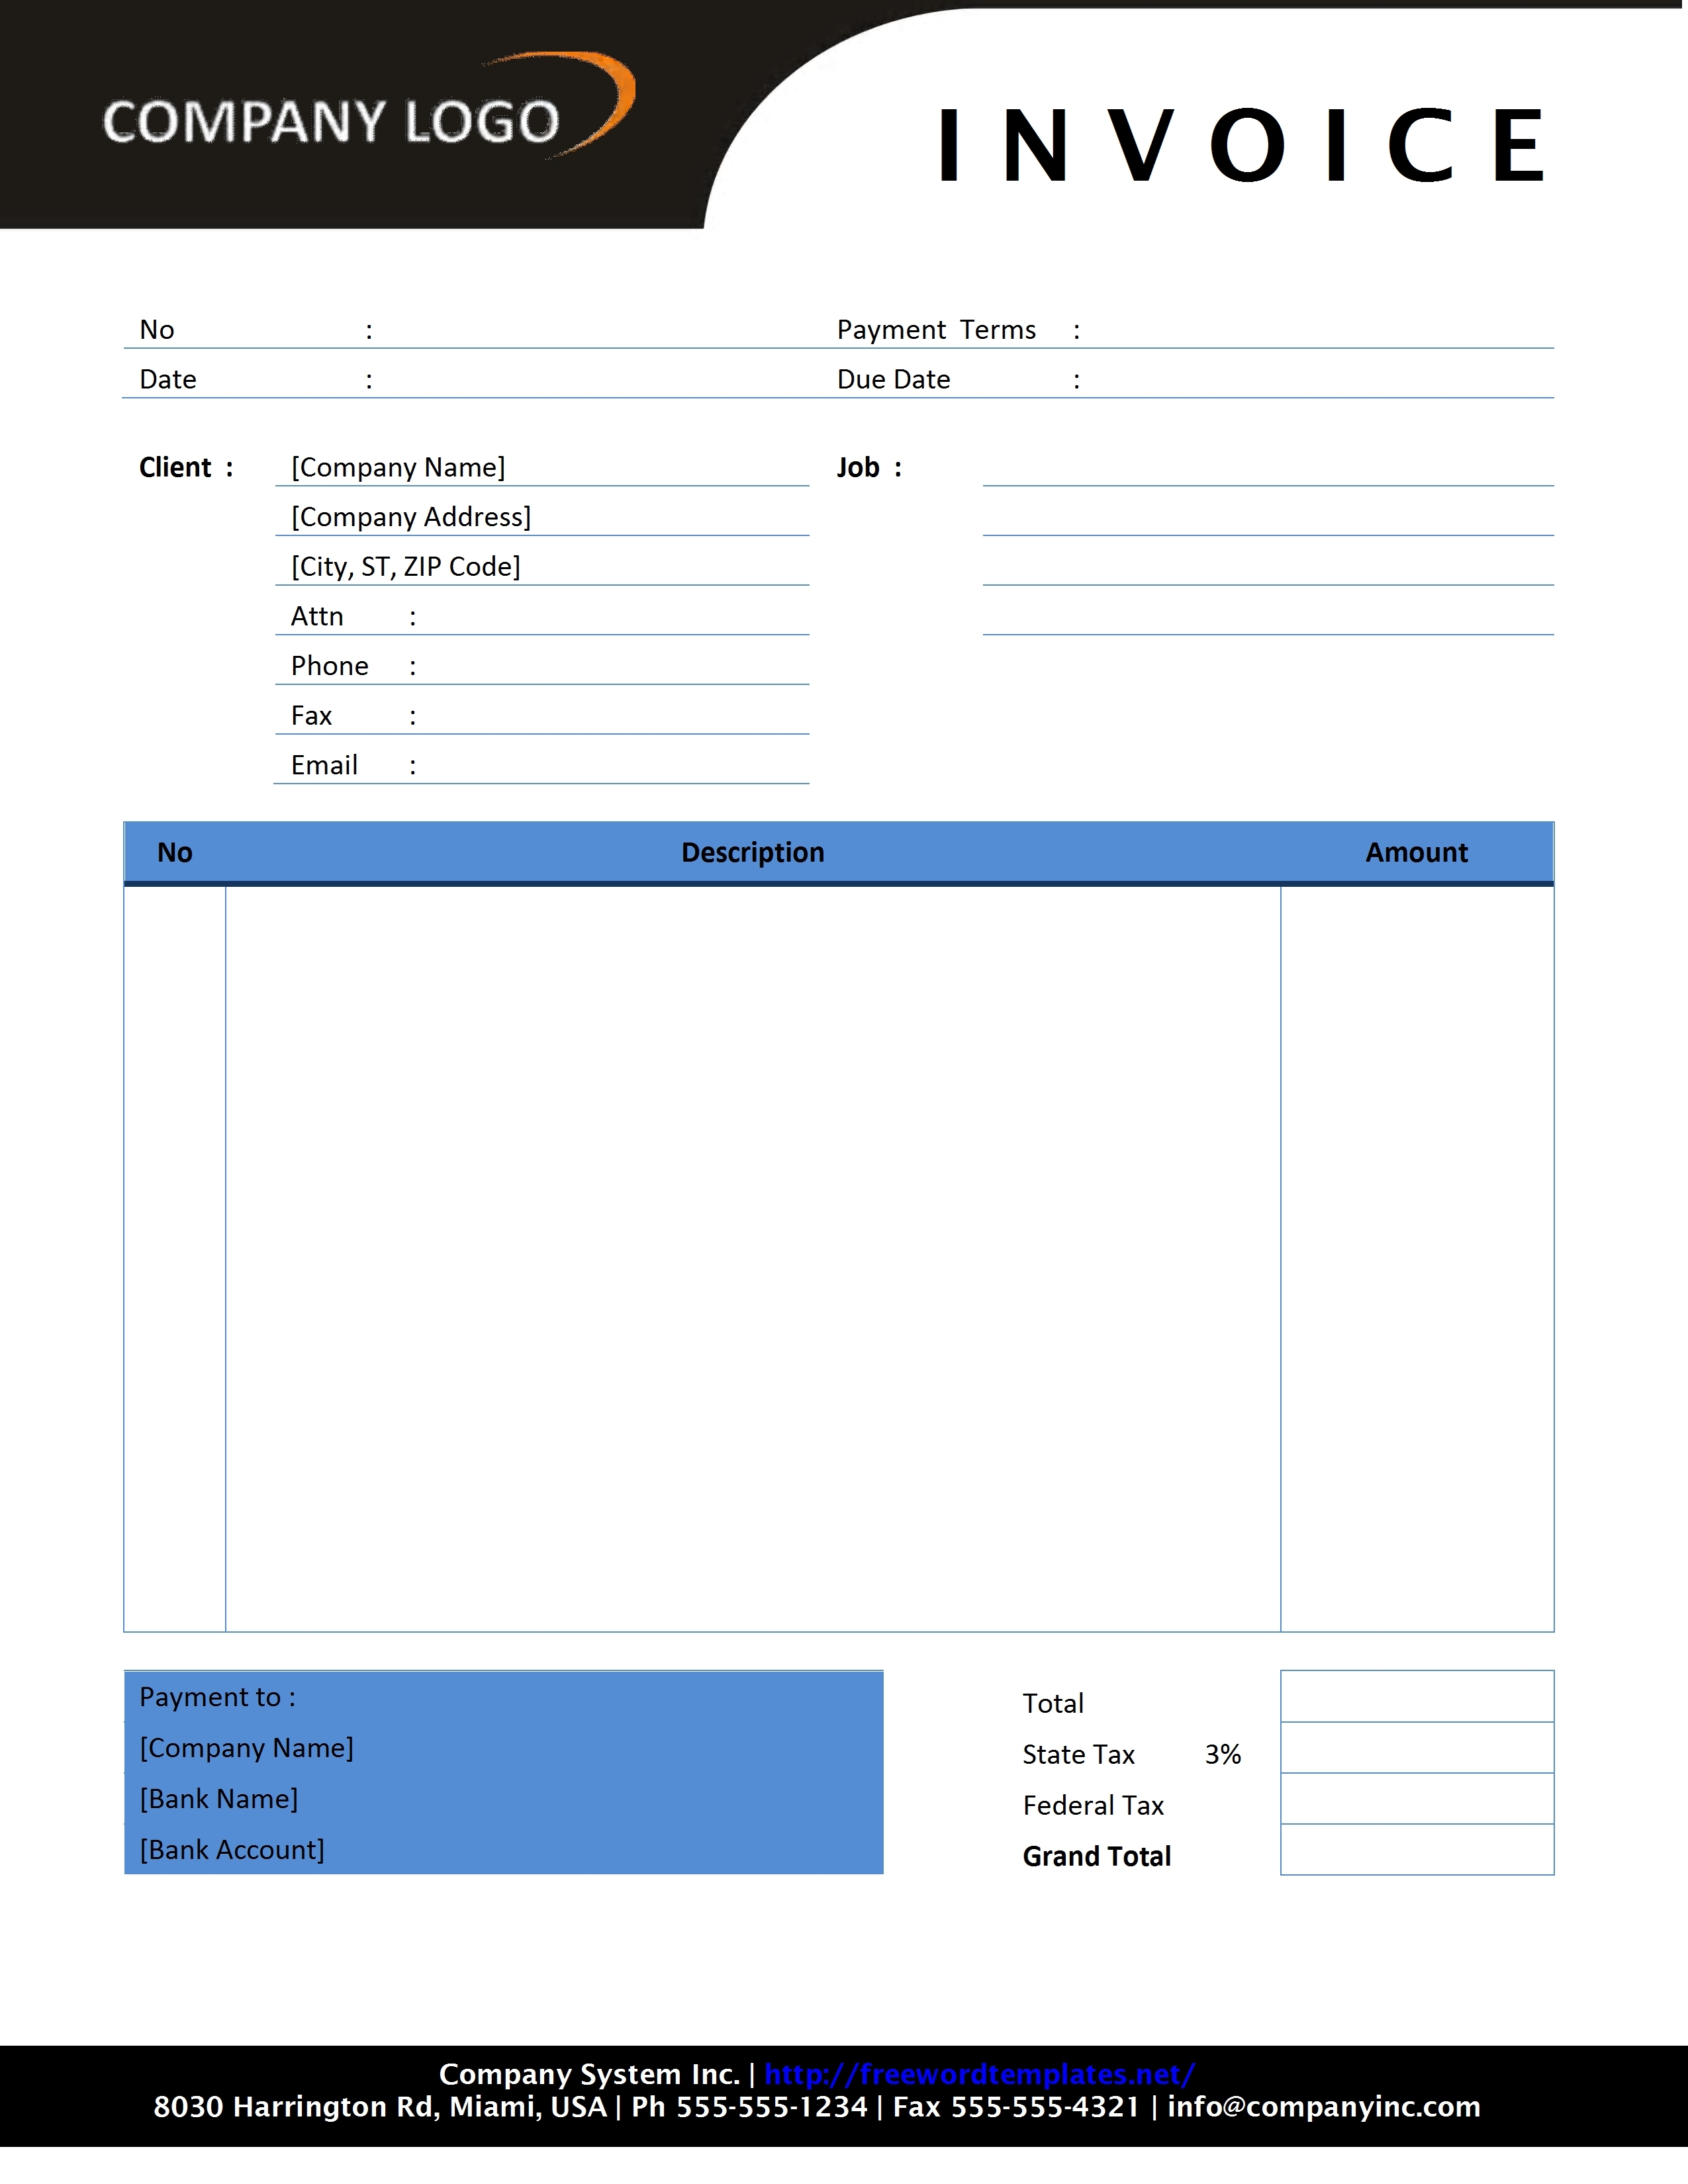 invoices in word contractor invoice template free microsoft word templates 2550 X 3300